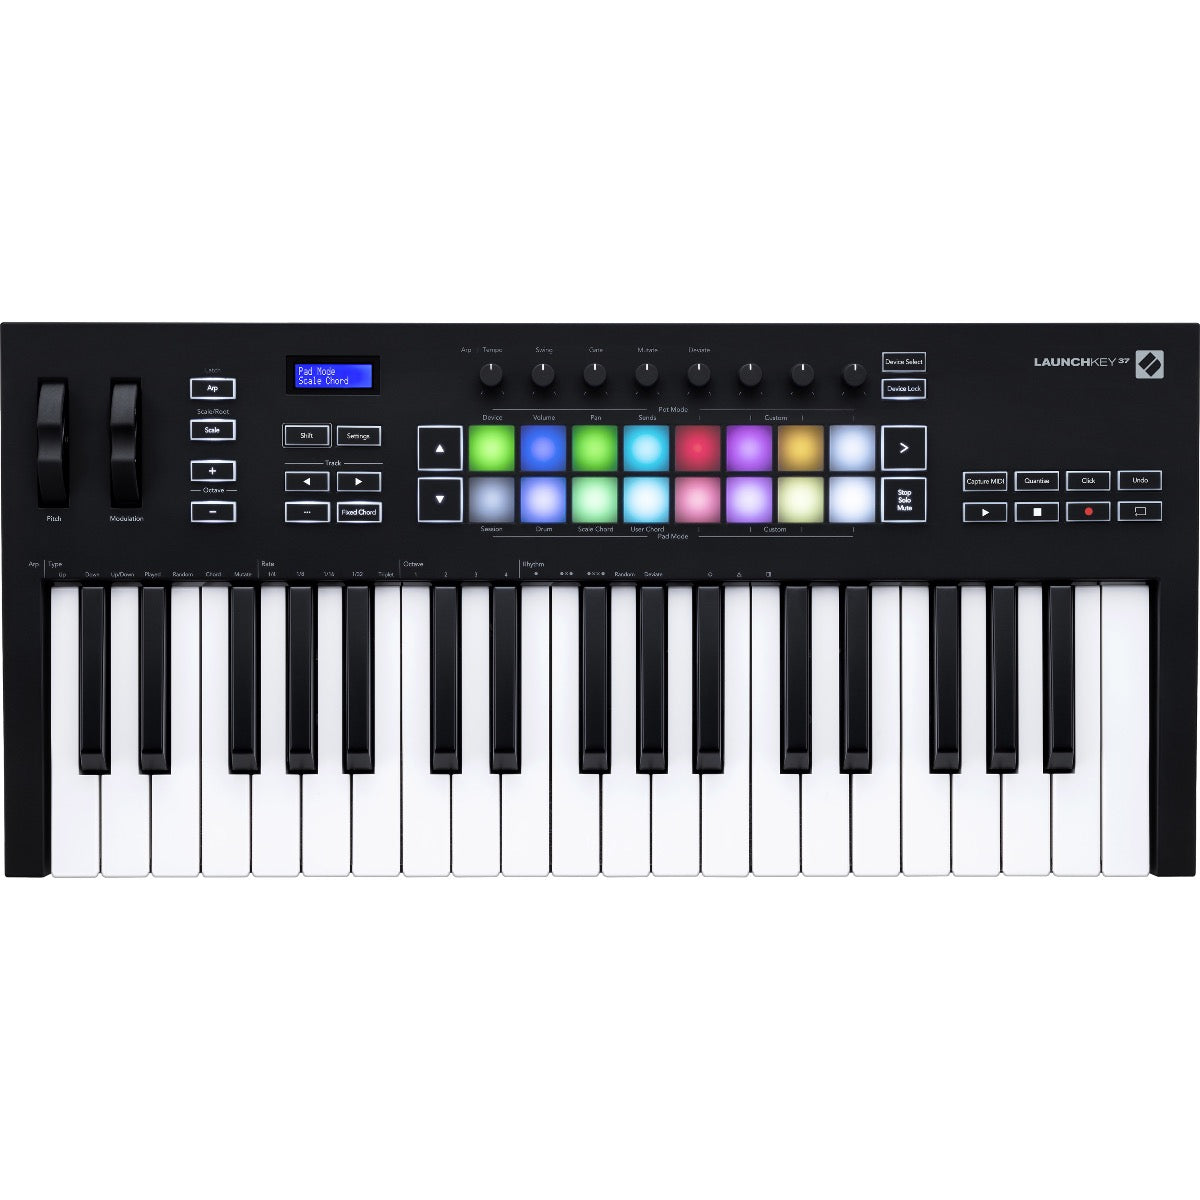 Top view of Novation Launchkey 37 MK3 Keyboard Controller